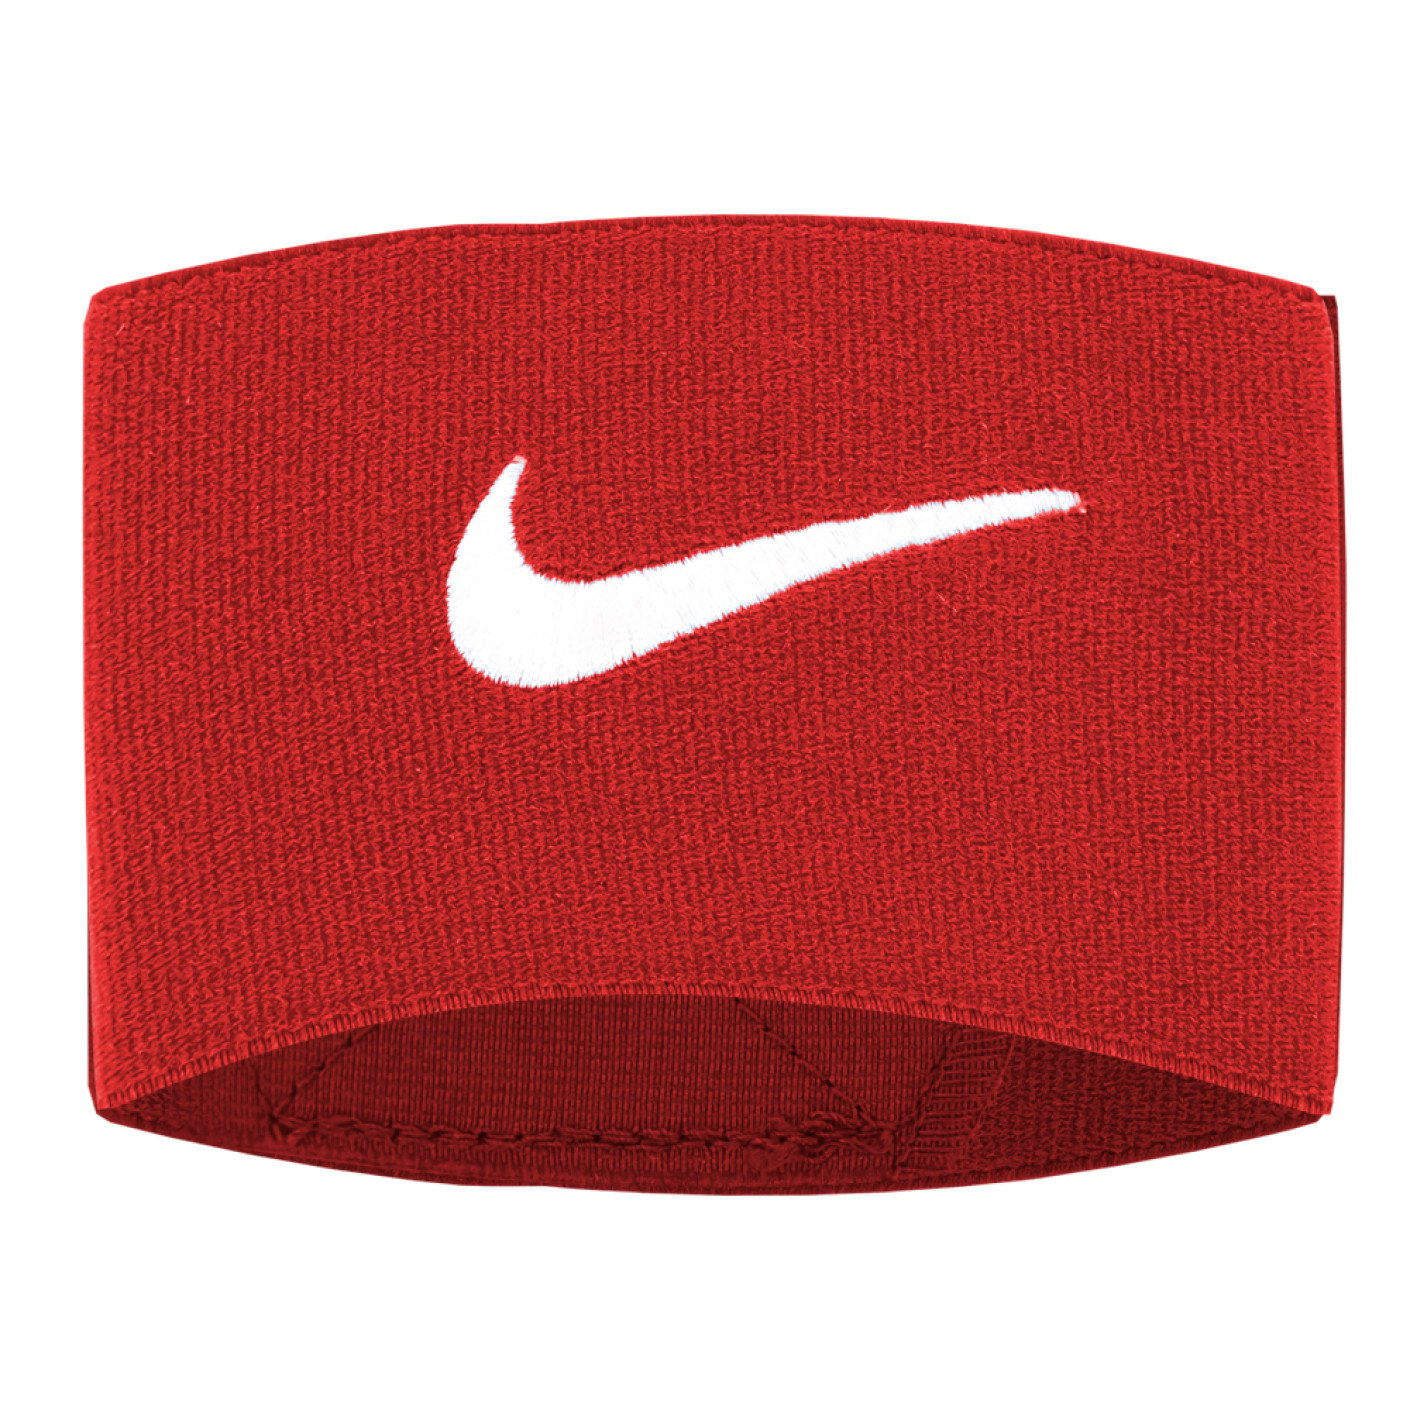 Nike Sokstoppers Rood Wit